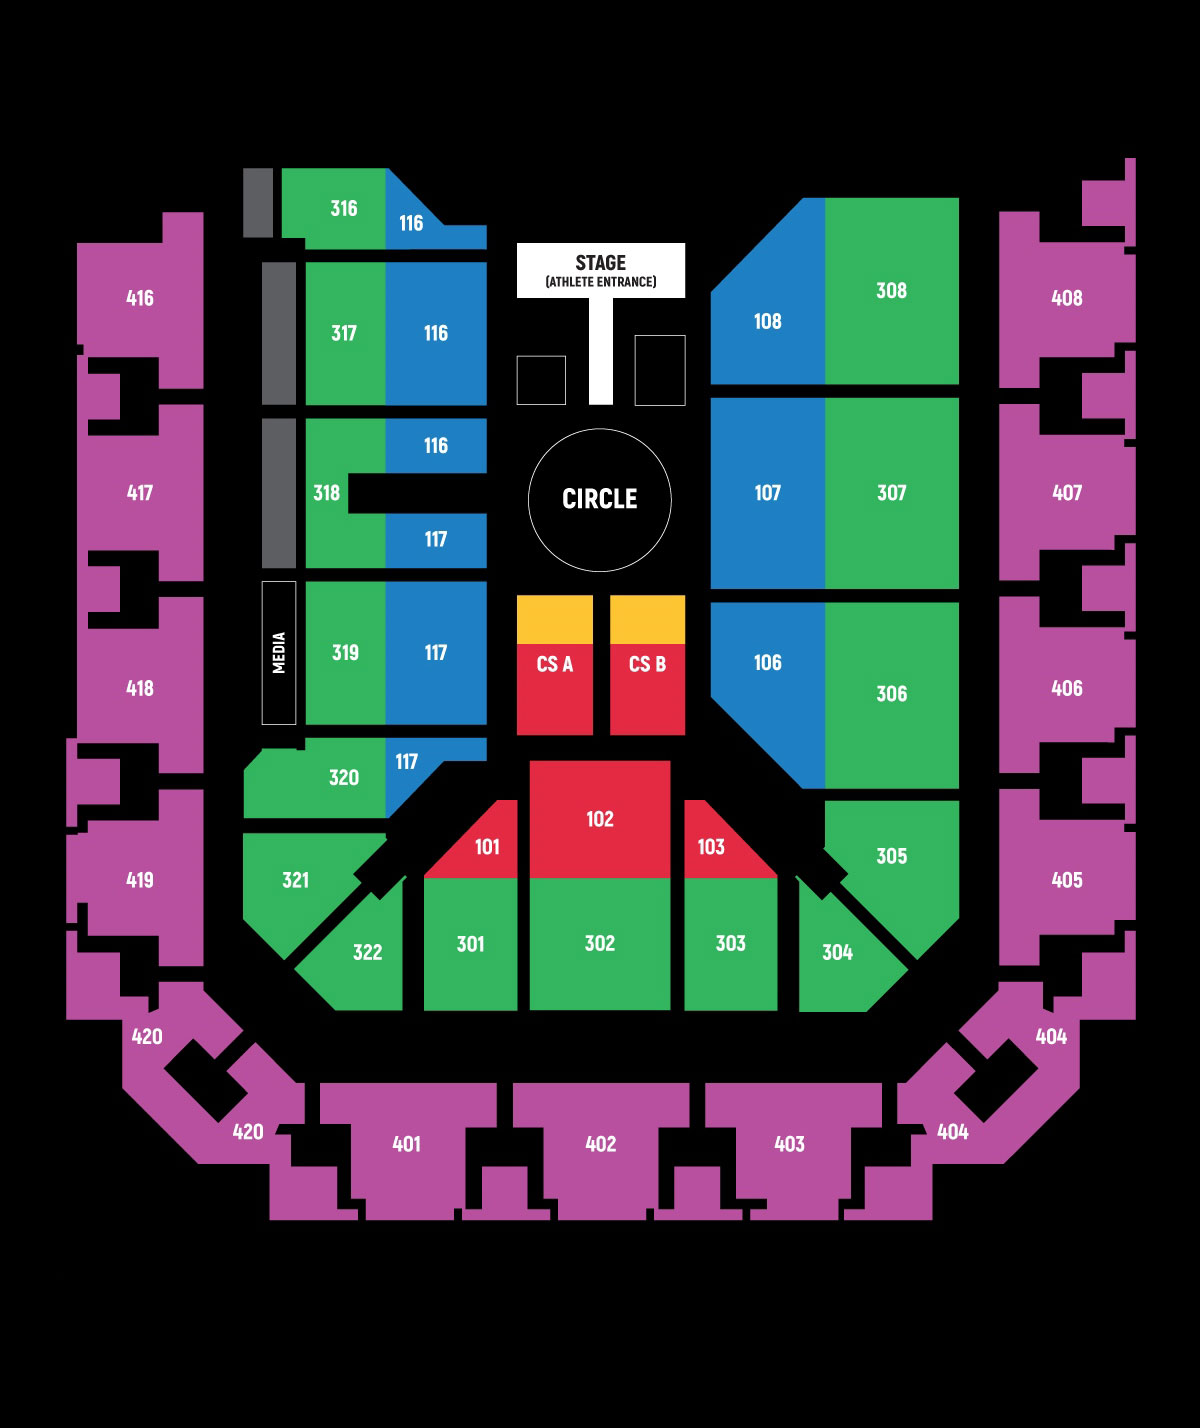 axiata-arena-seating-plan-seating-plans-of-sport-arenas-around-the-world